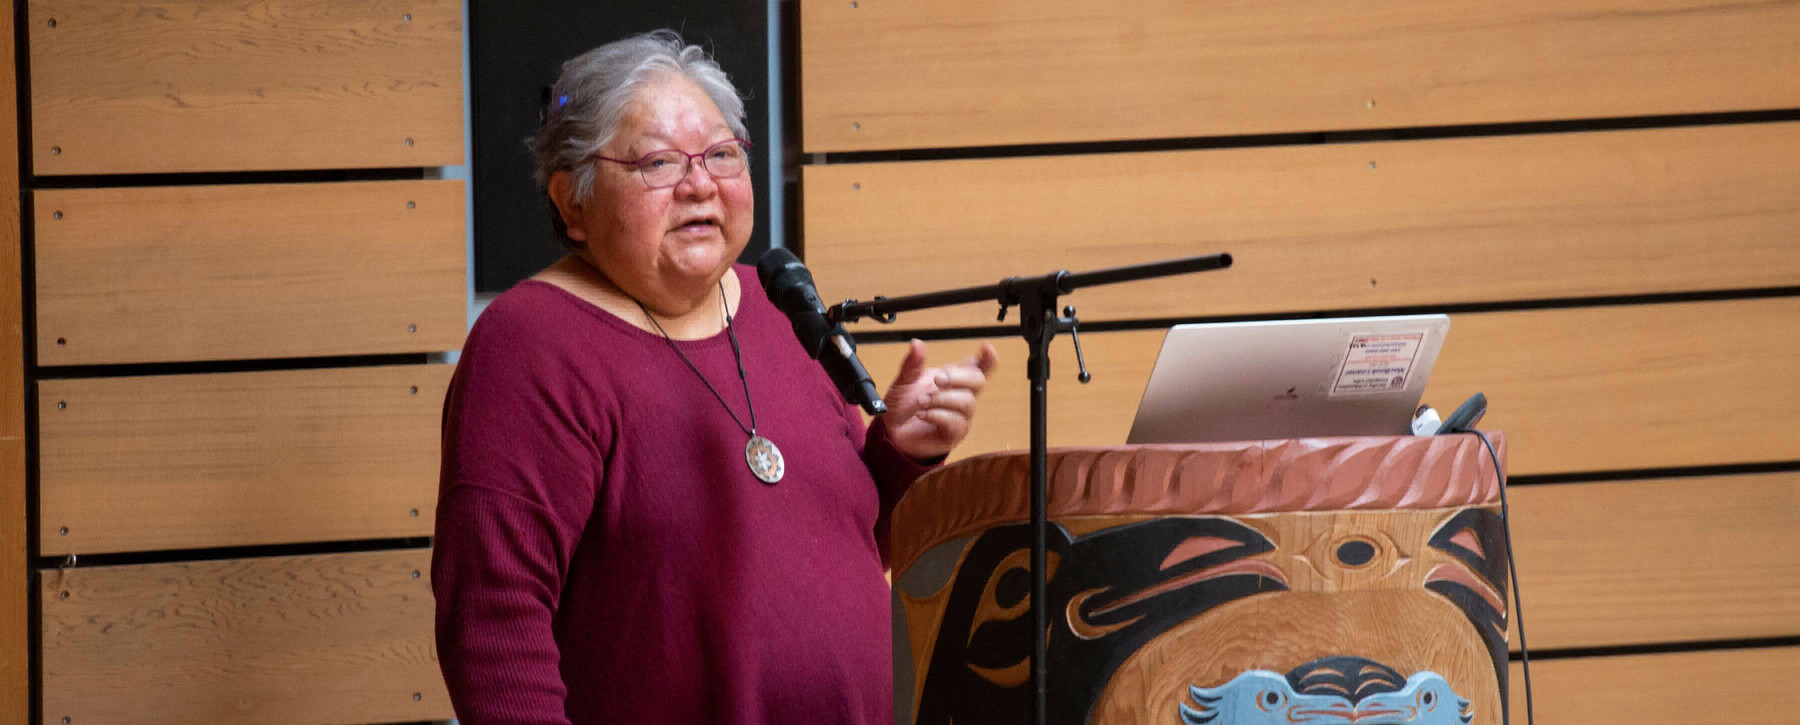 Lorna Williams is pictured speaking at the First Peoples House on campus. She is presenting during an event celebrating Indigenous Language Revitalization in 2022.